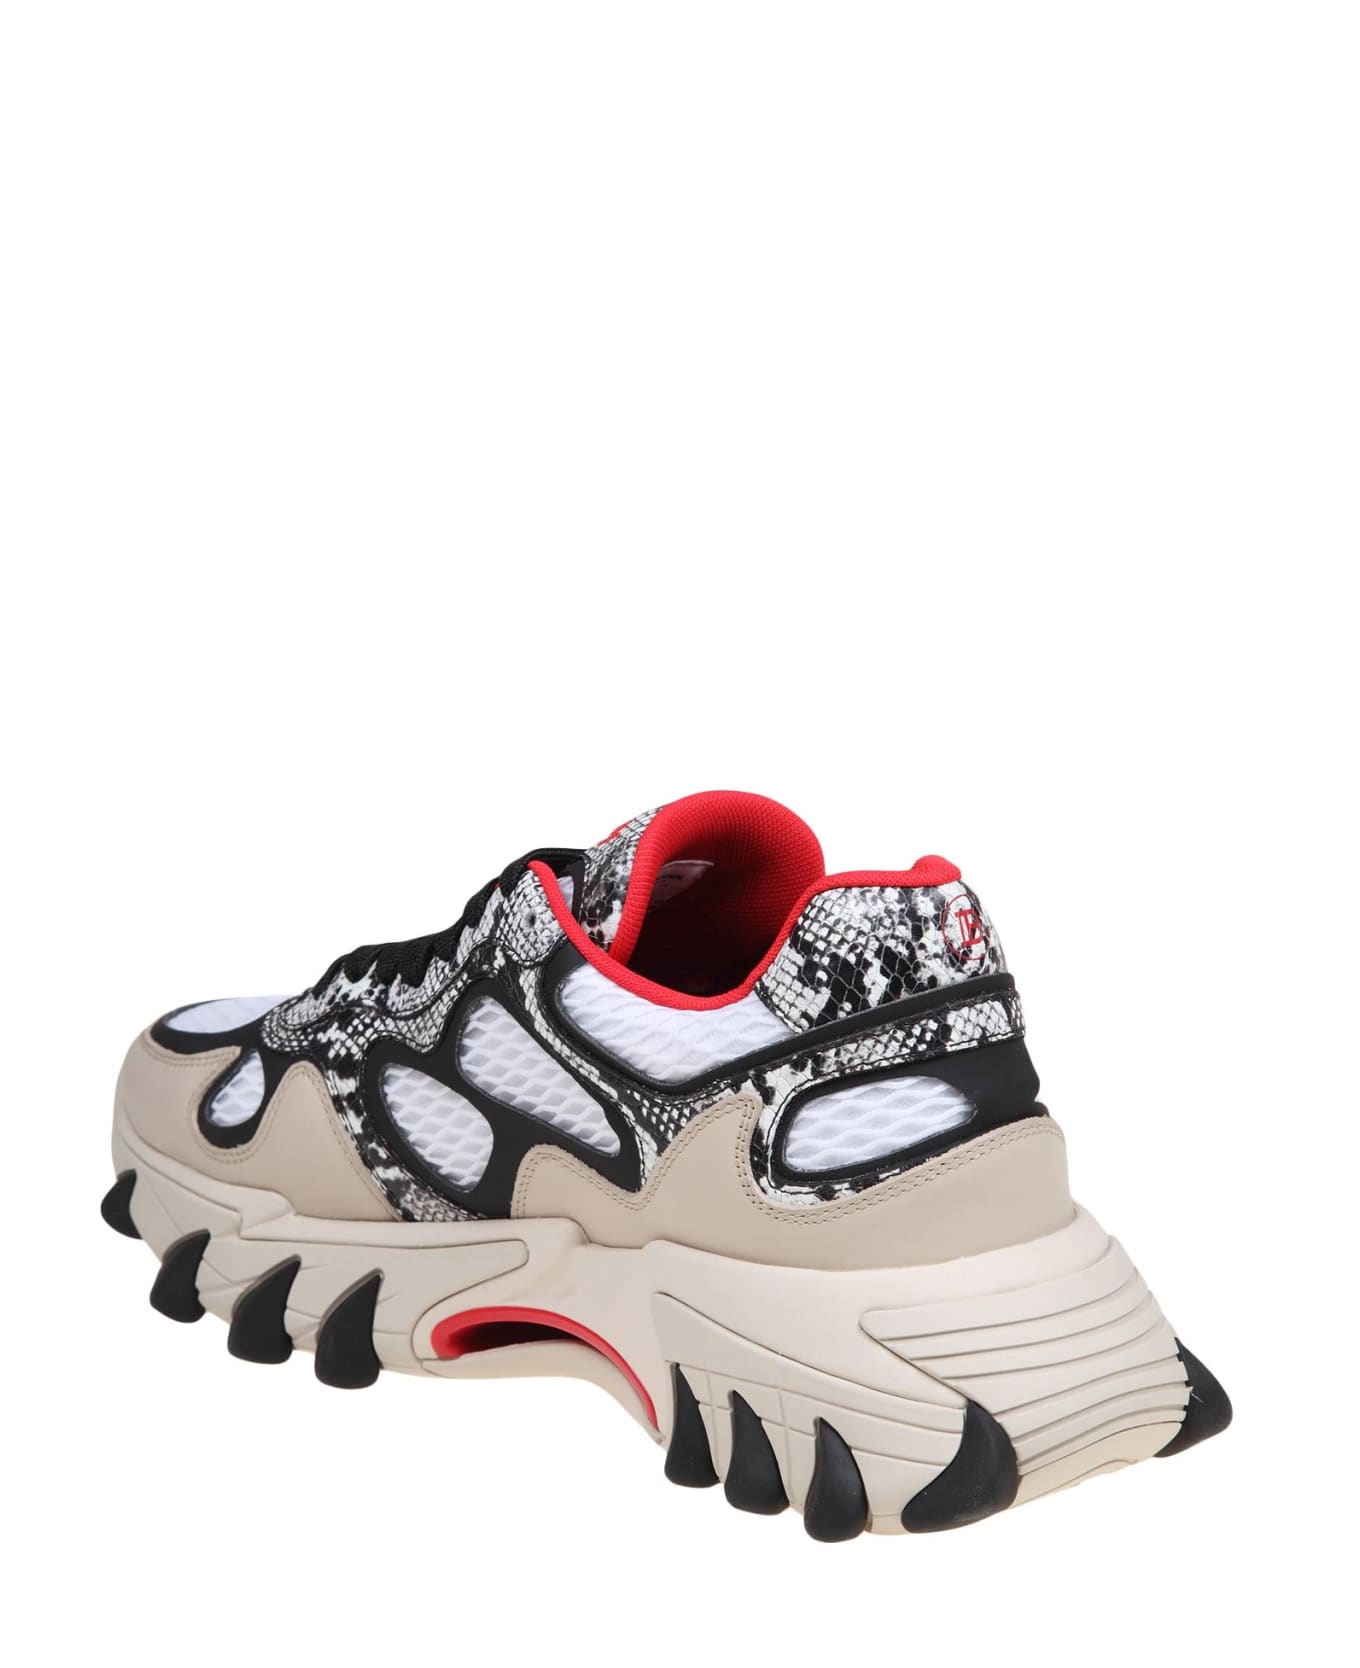 Balmain B-east Sneakers In Mix Of Materials With Python Effect - Grey/Red